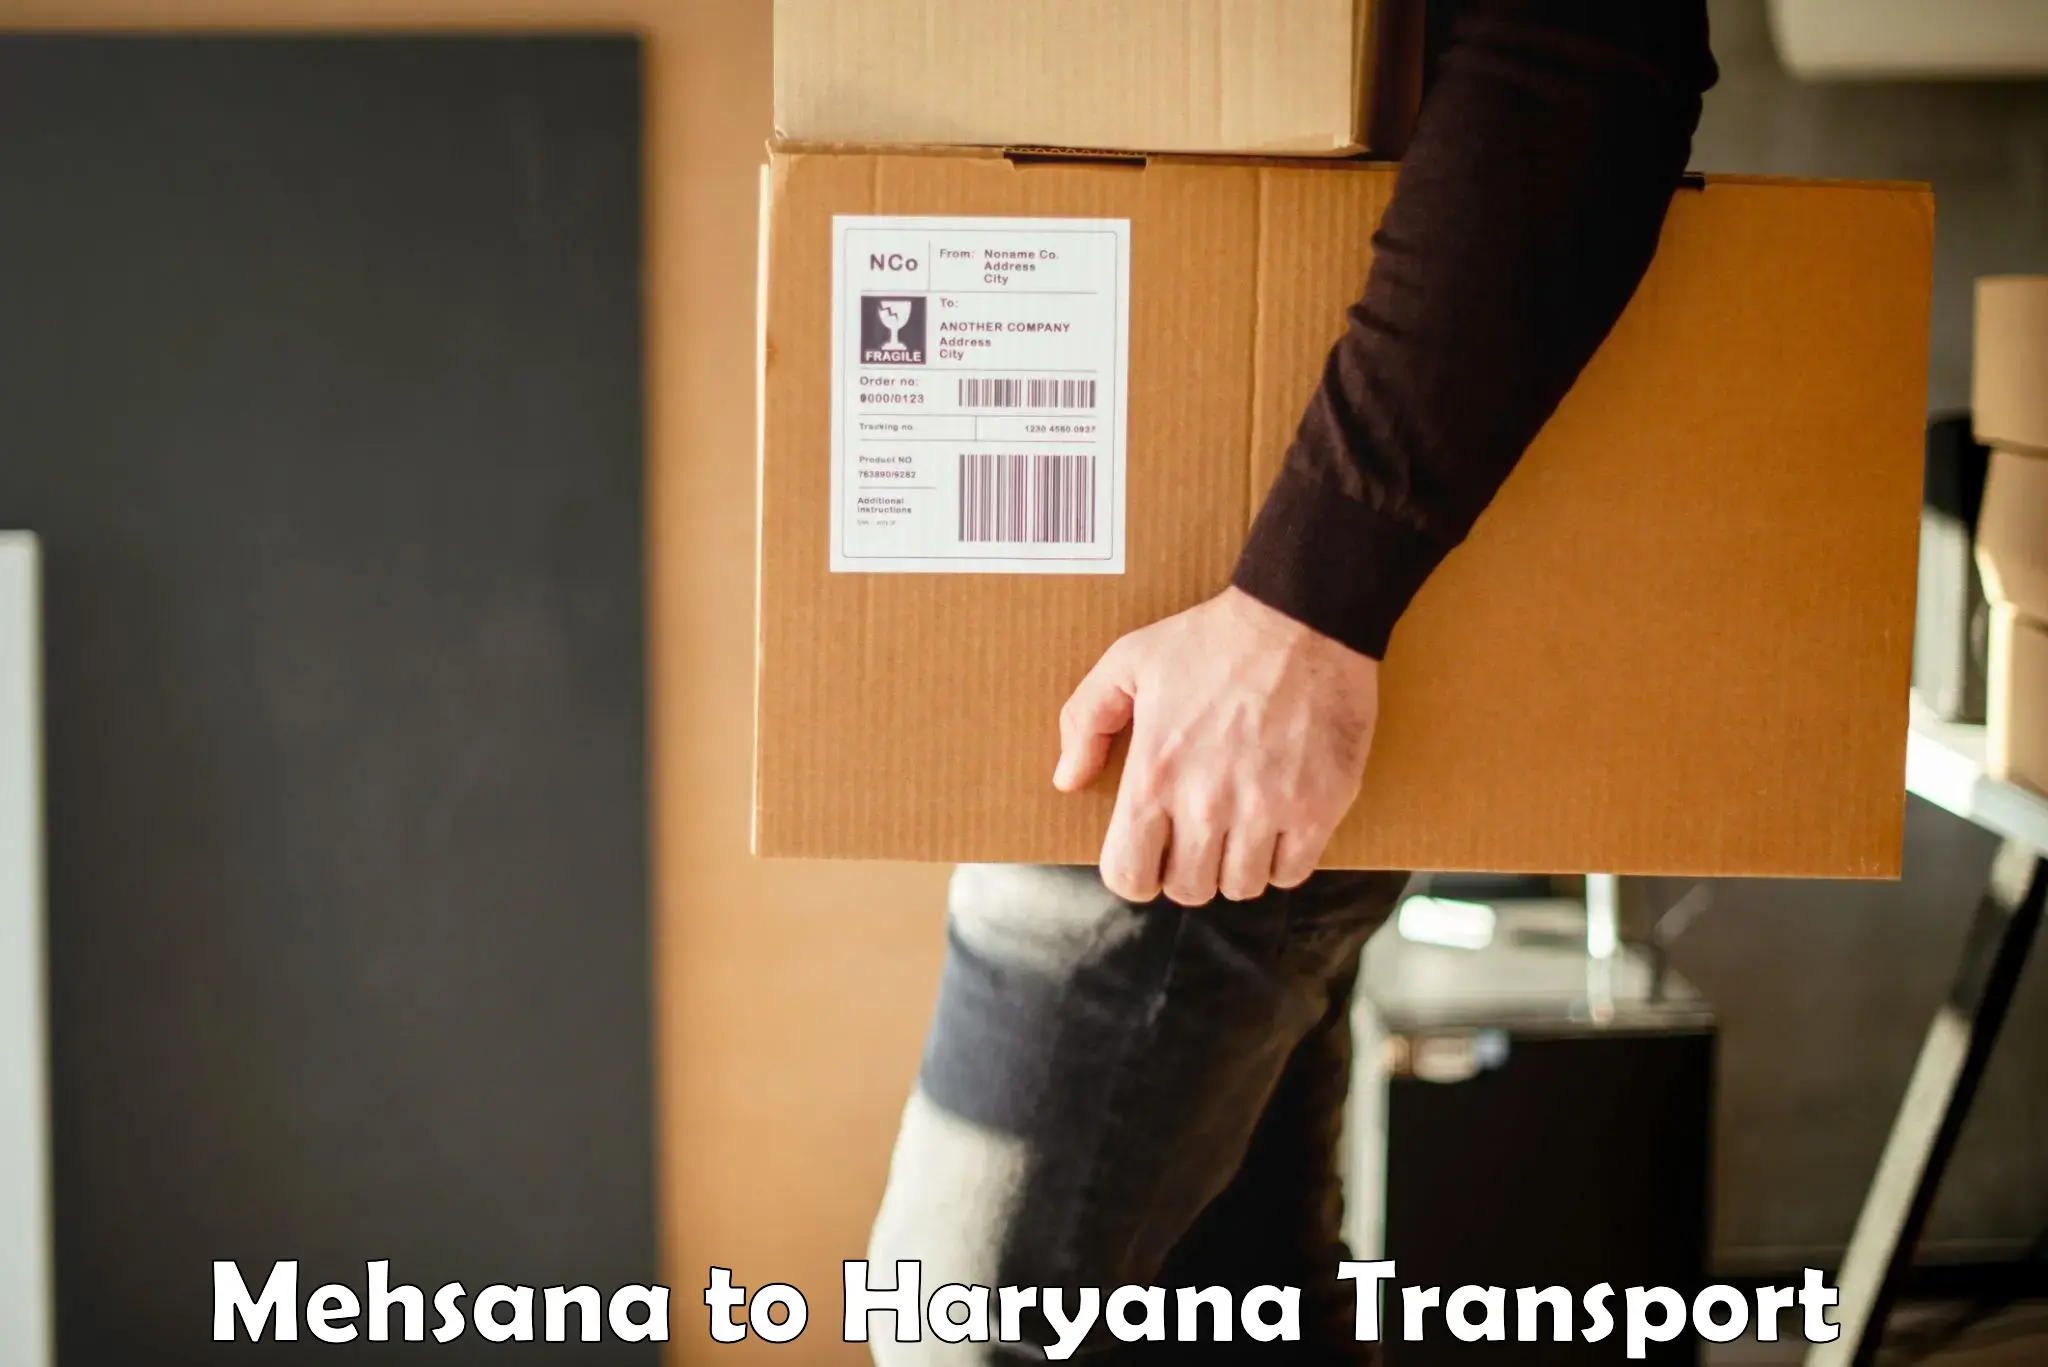 Road transport online services Mehsana to Bilaspur Haryana